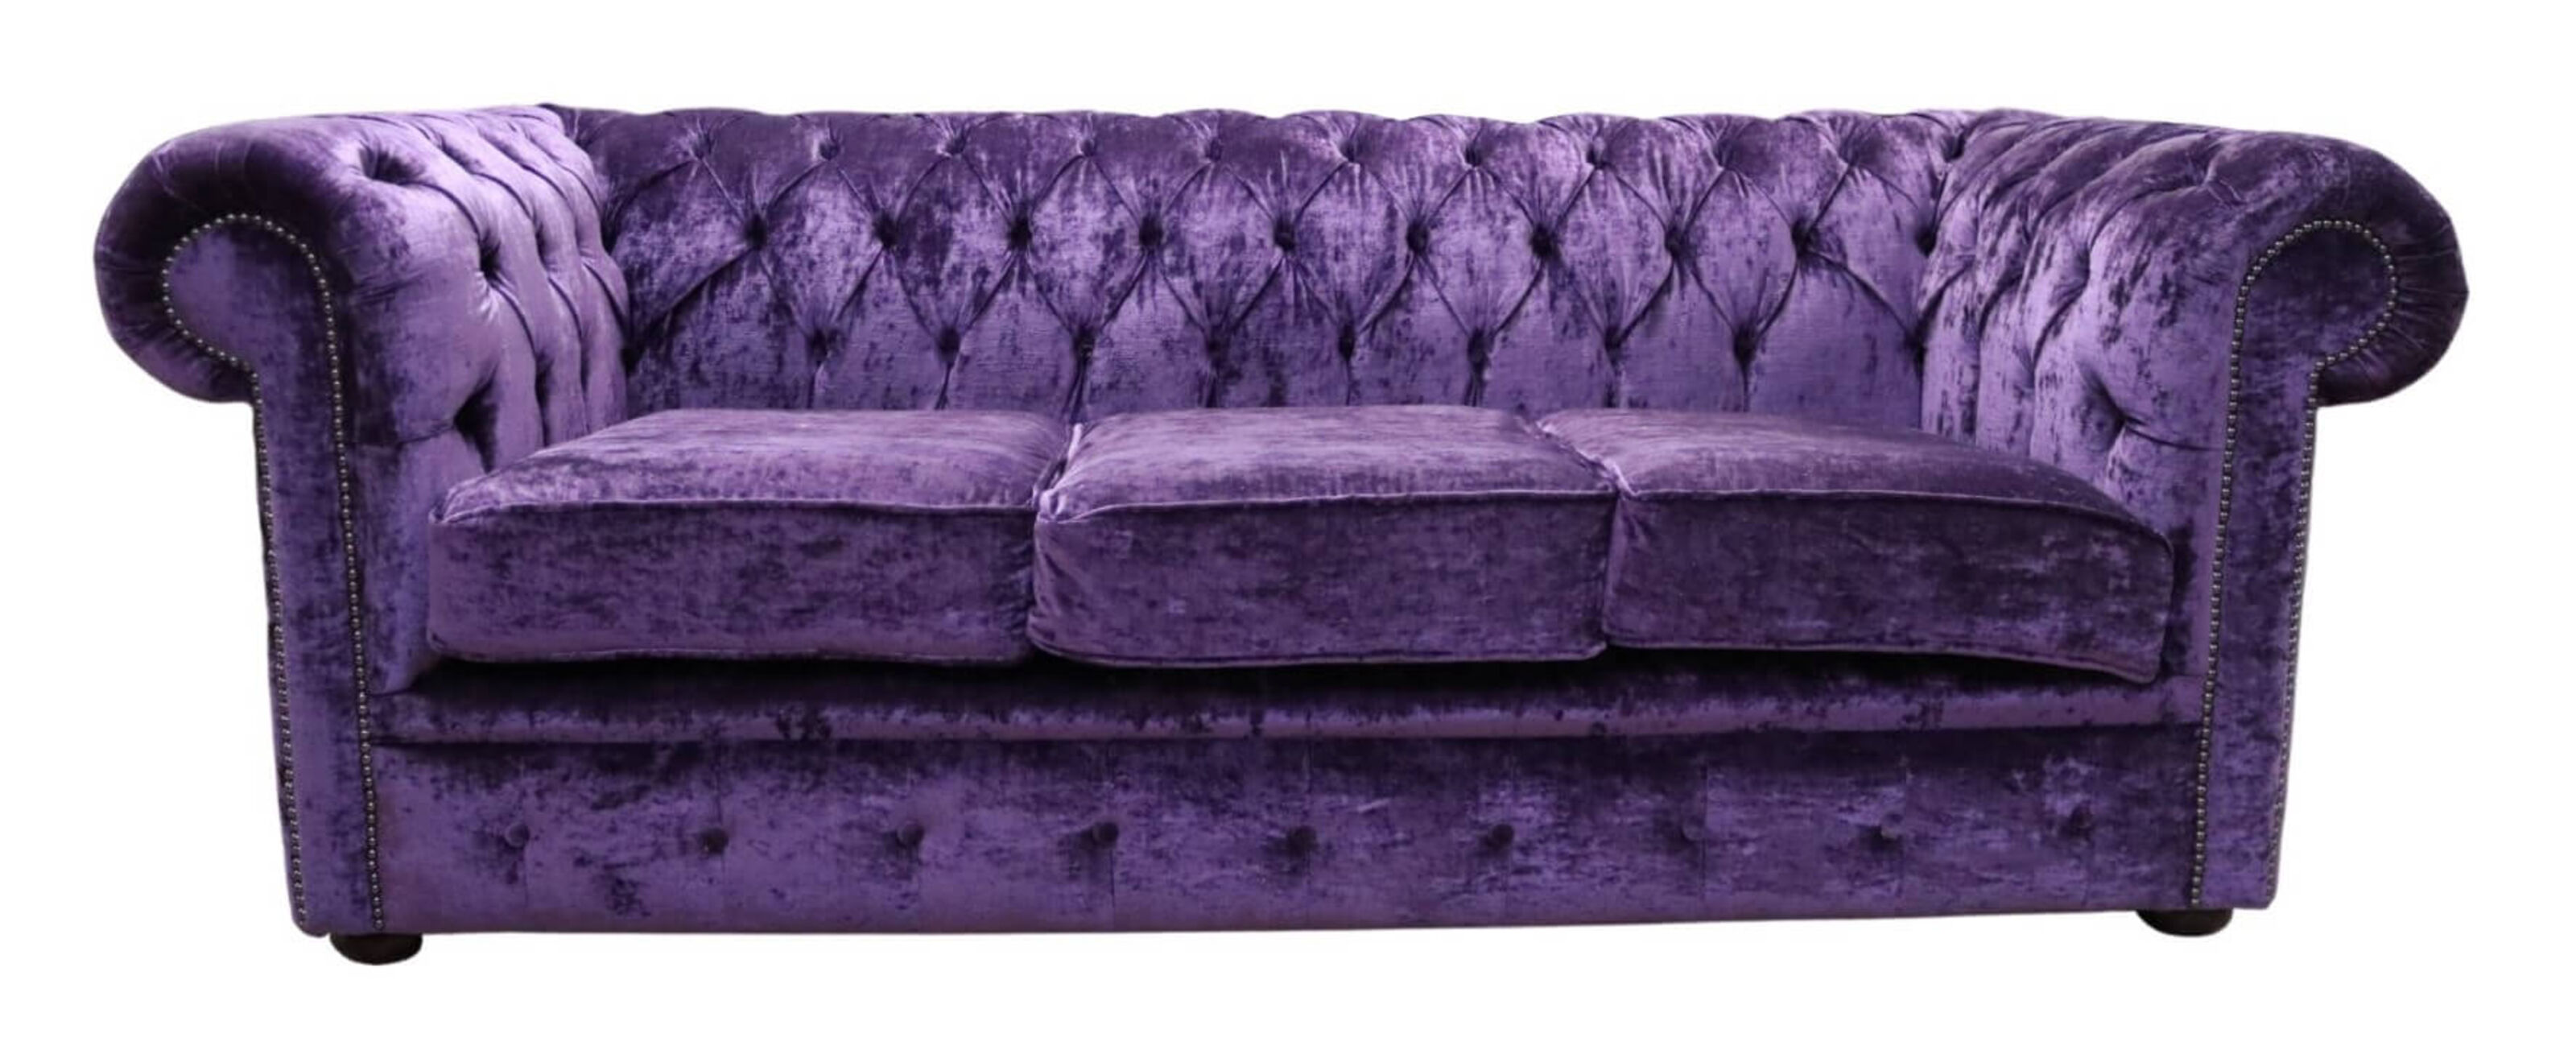 Textile Traditions Exploring Fabric Options for Chesterfield Sofas  %Post Title